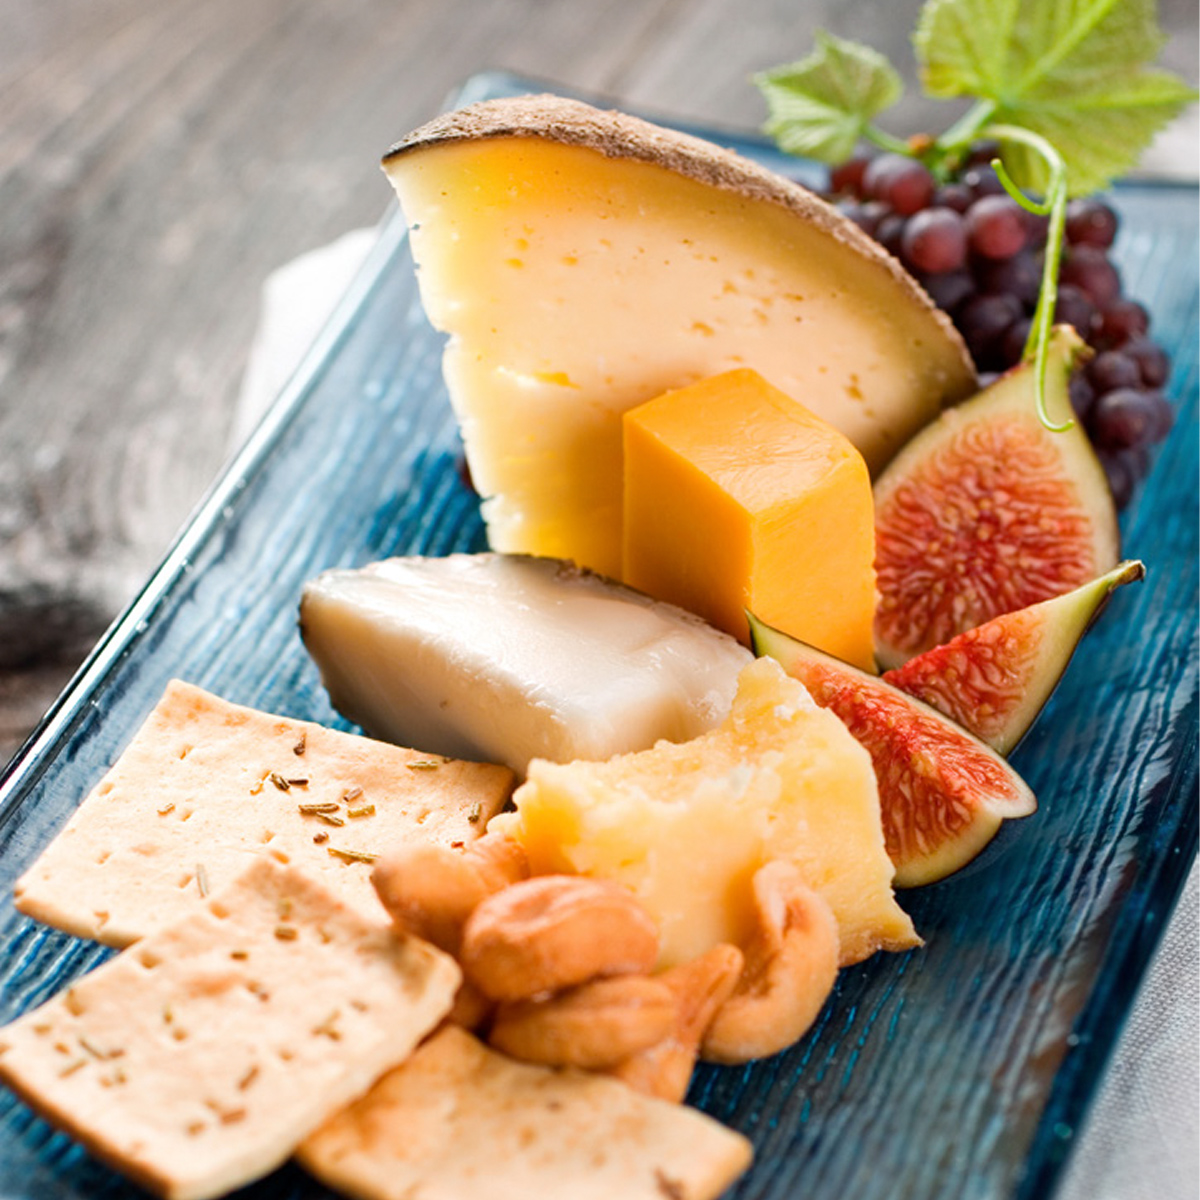 Cheese tray with fruit, nuts, and crackers